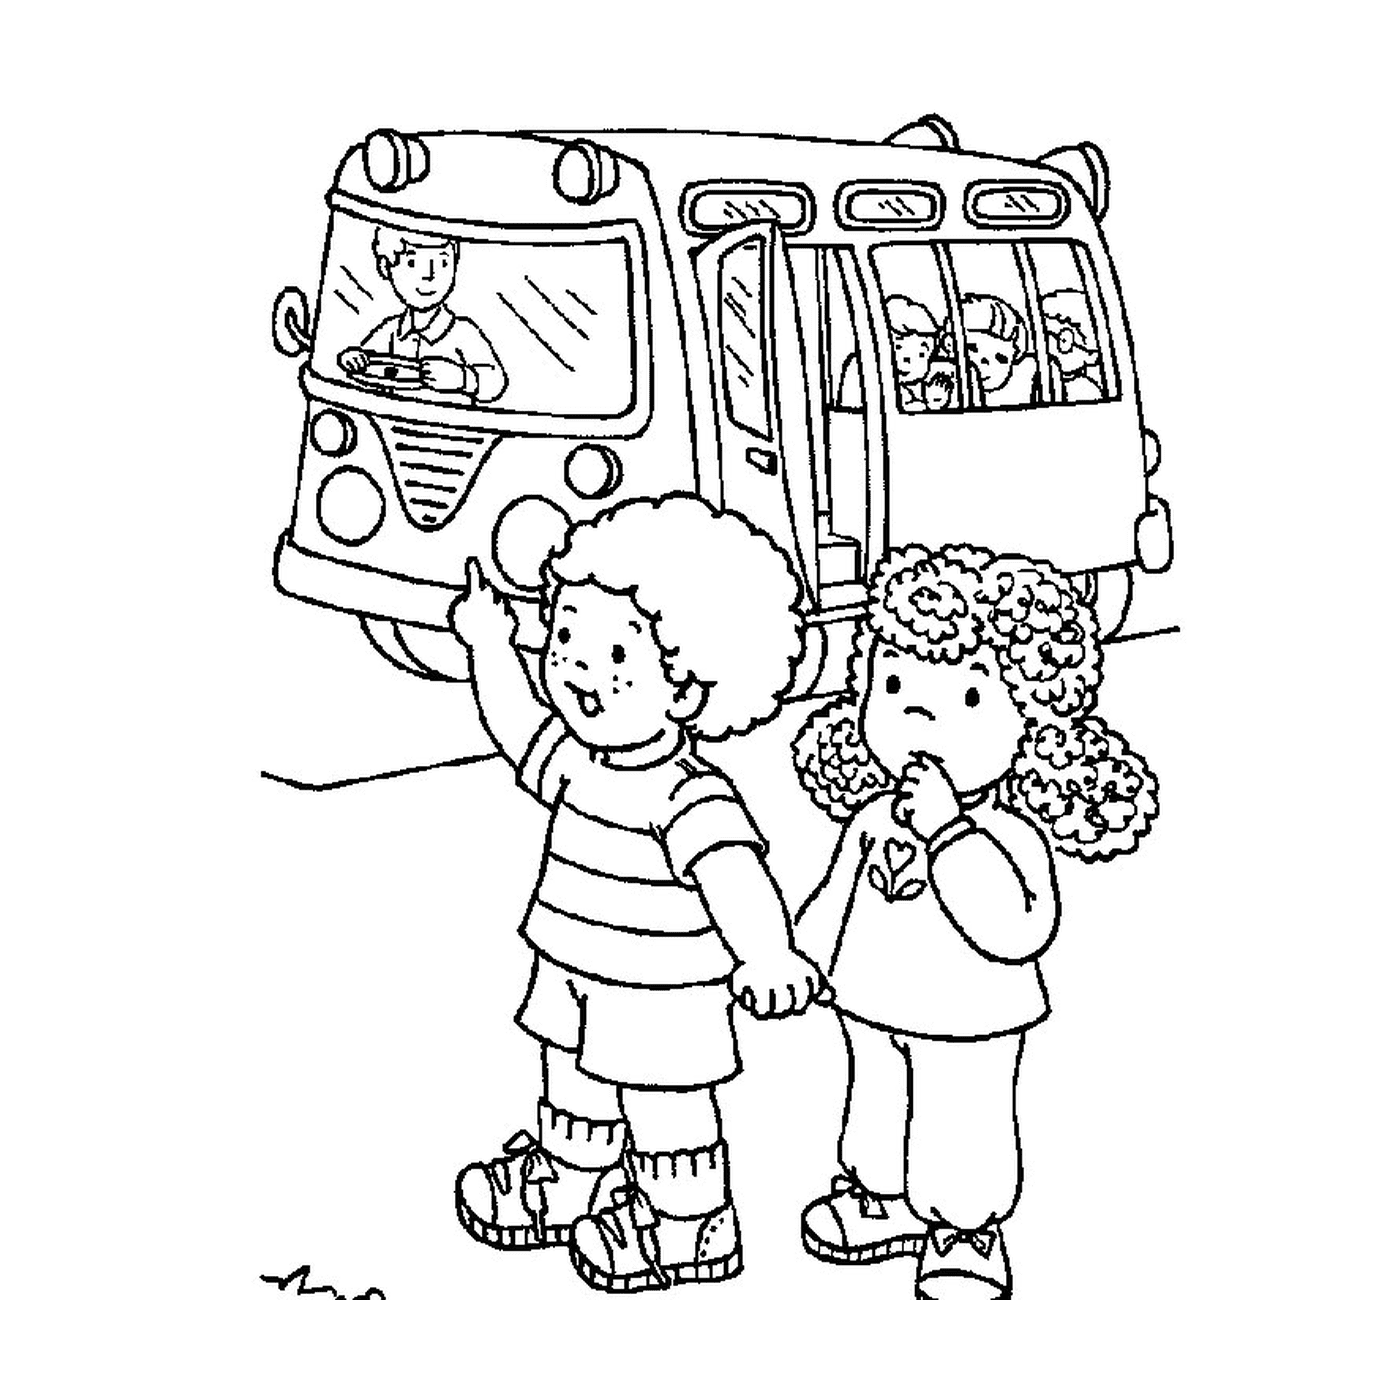  Two children in front of a school bus 